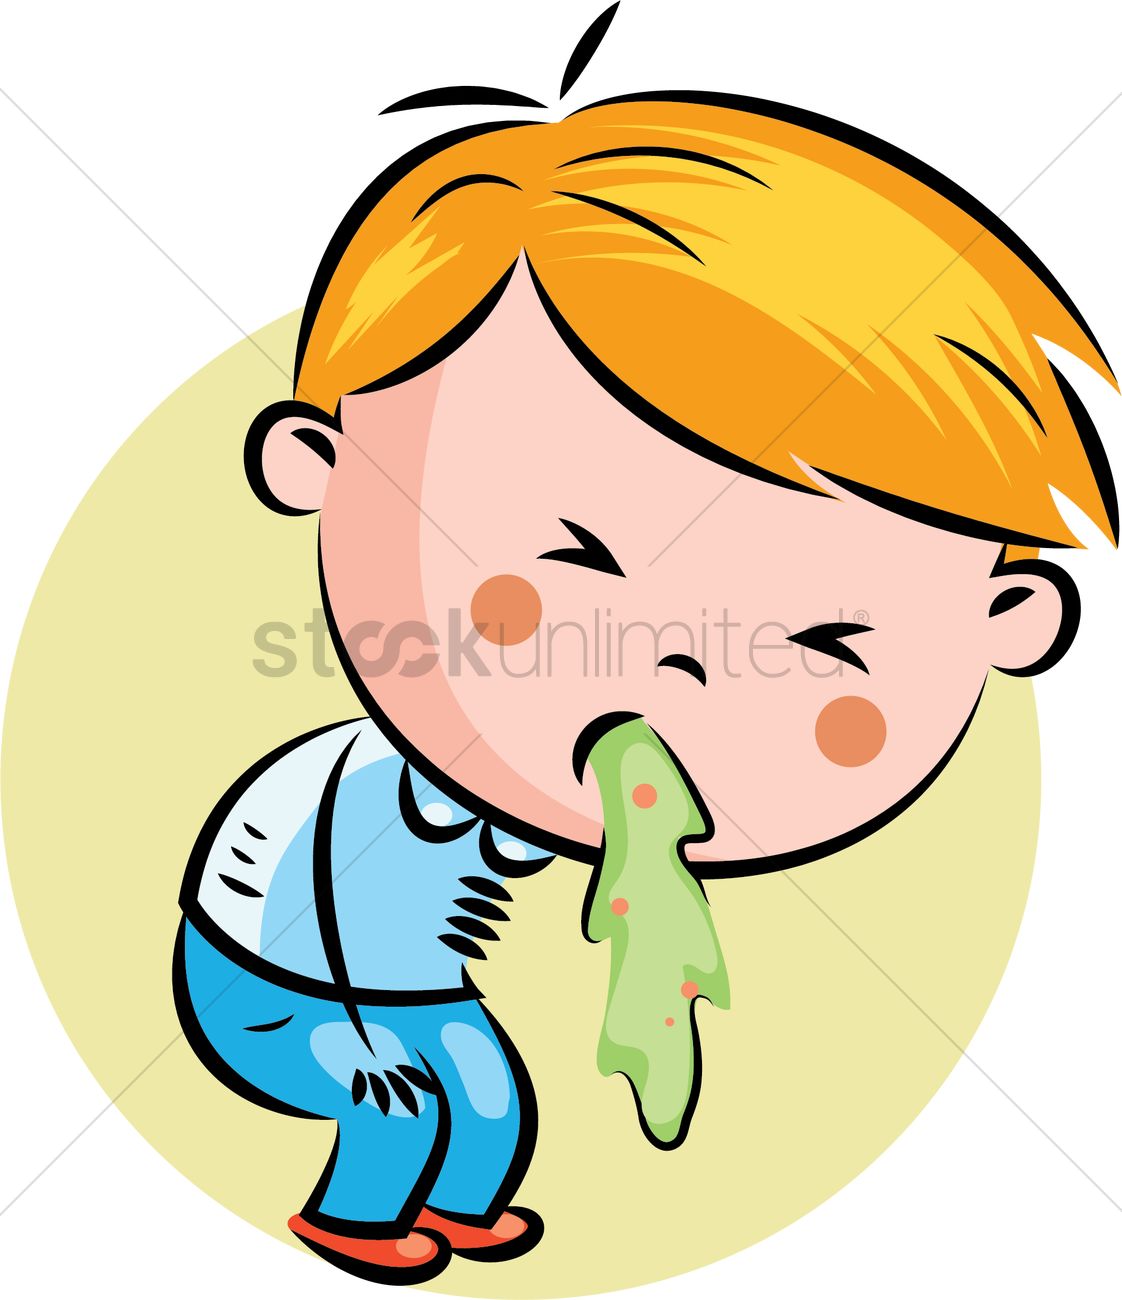 nausea and vomiting clipart